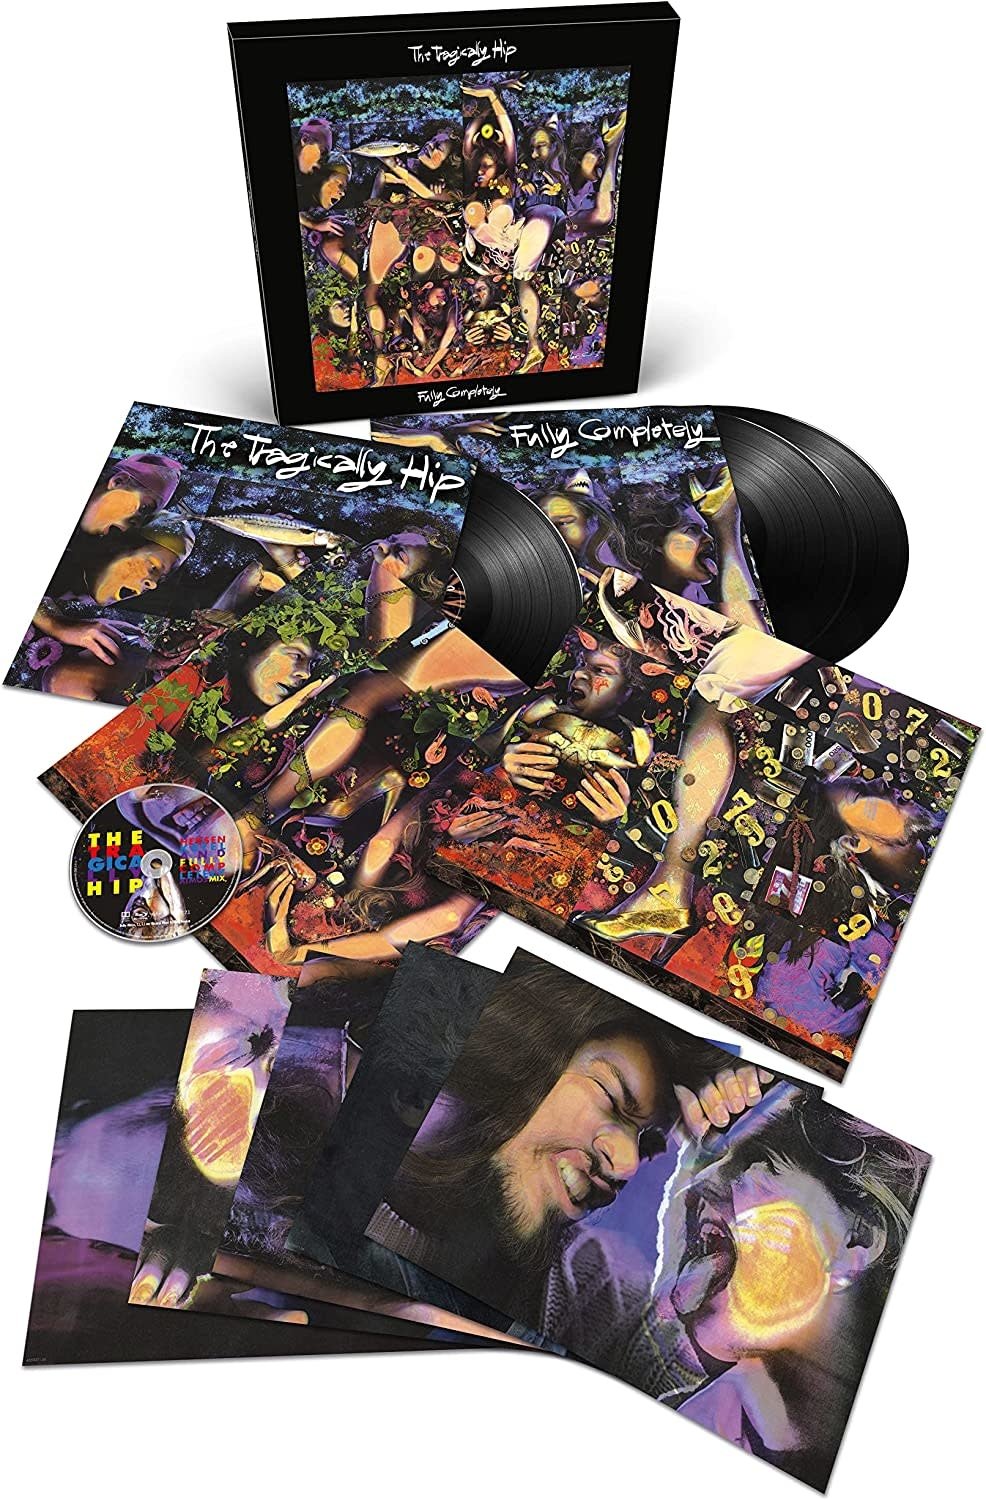 Rock/Pop The Tragically Hip - Fully Completely 30th Ann. Ed. Boxset (Includes Live at the Horseshoe 1992 + Bonus Tracks + Blu-ray + Book) (BOX SET BLOWOUT - 25% OFF!!) ($264.99 -> $198.74)